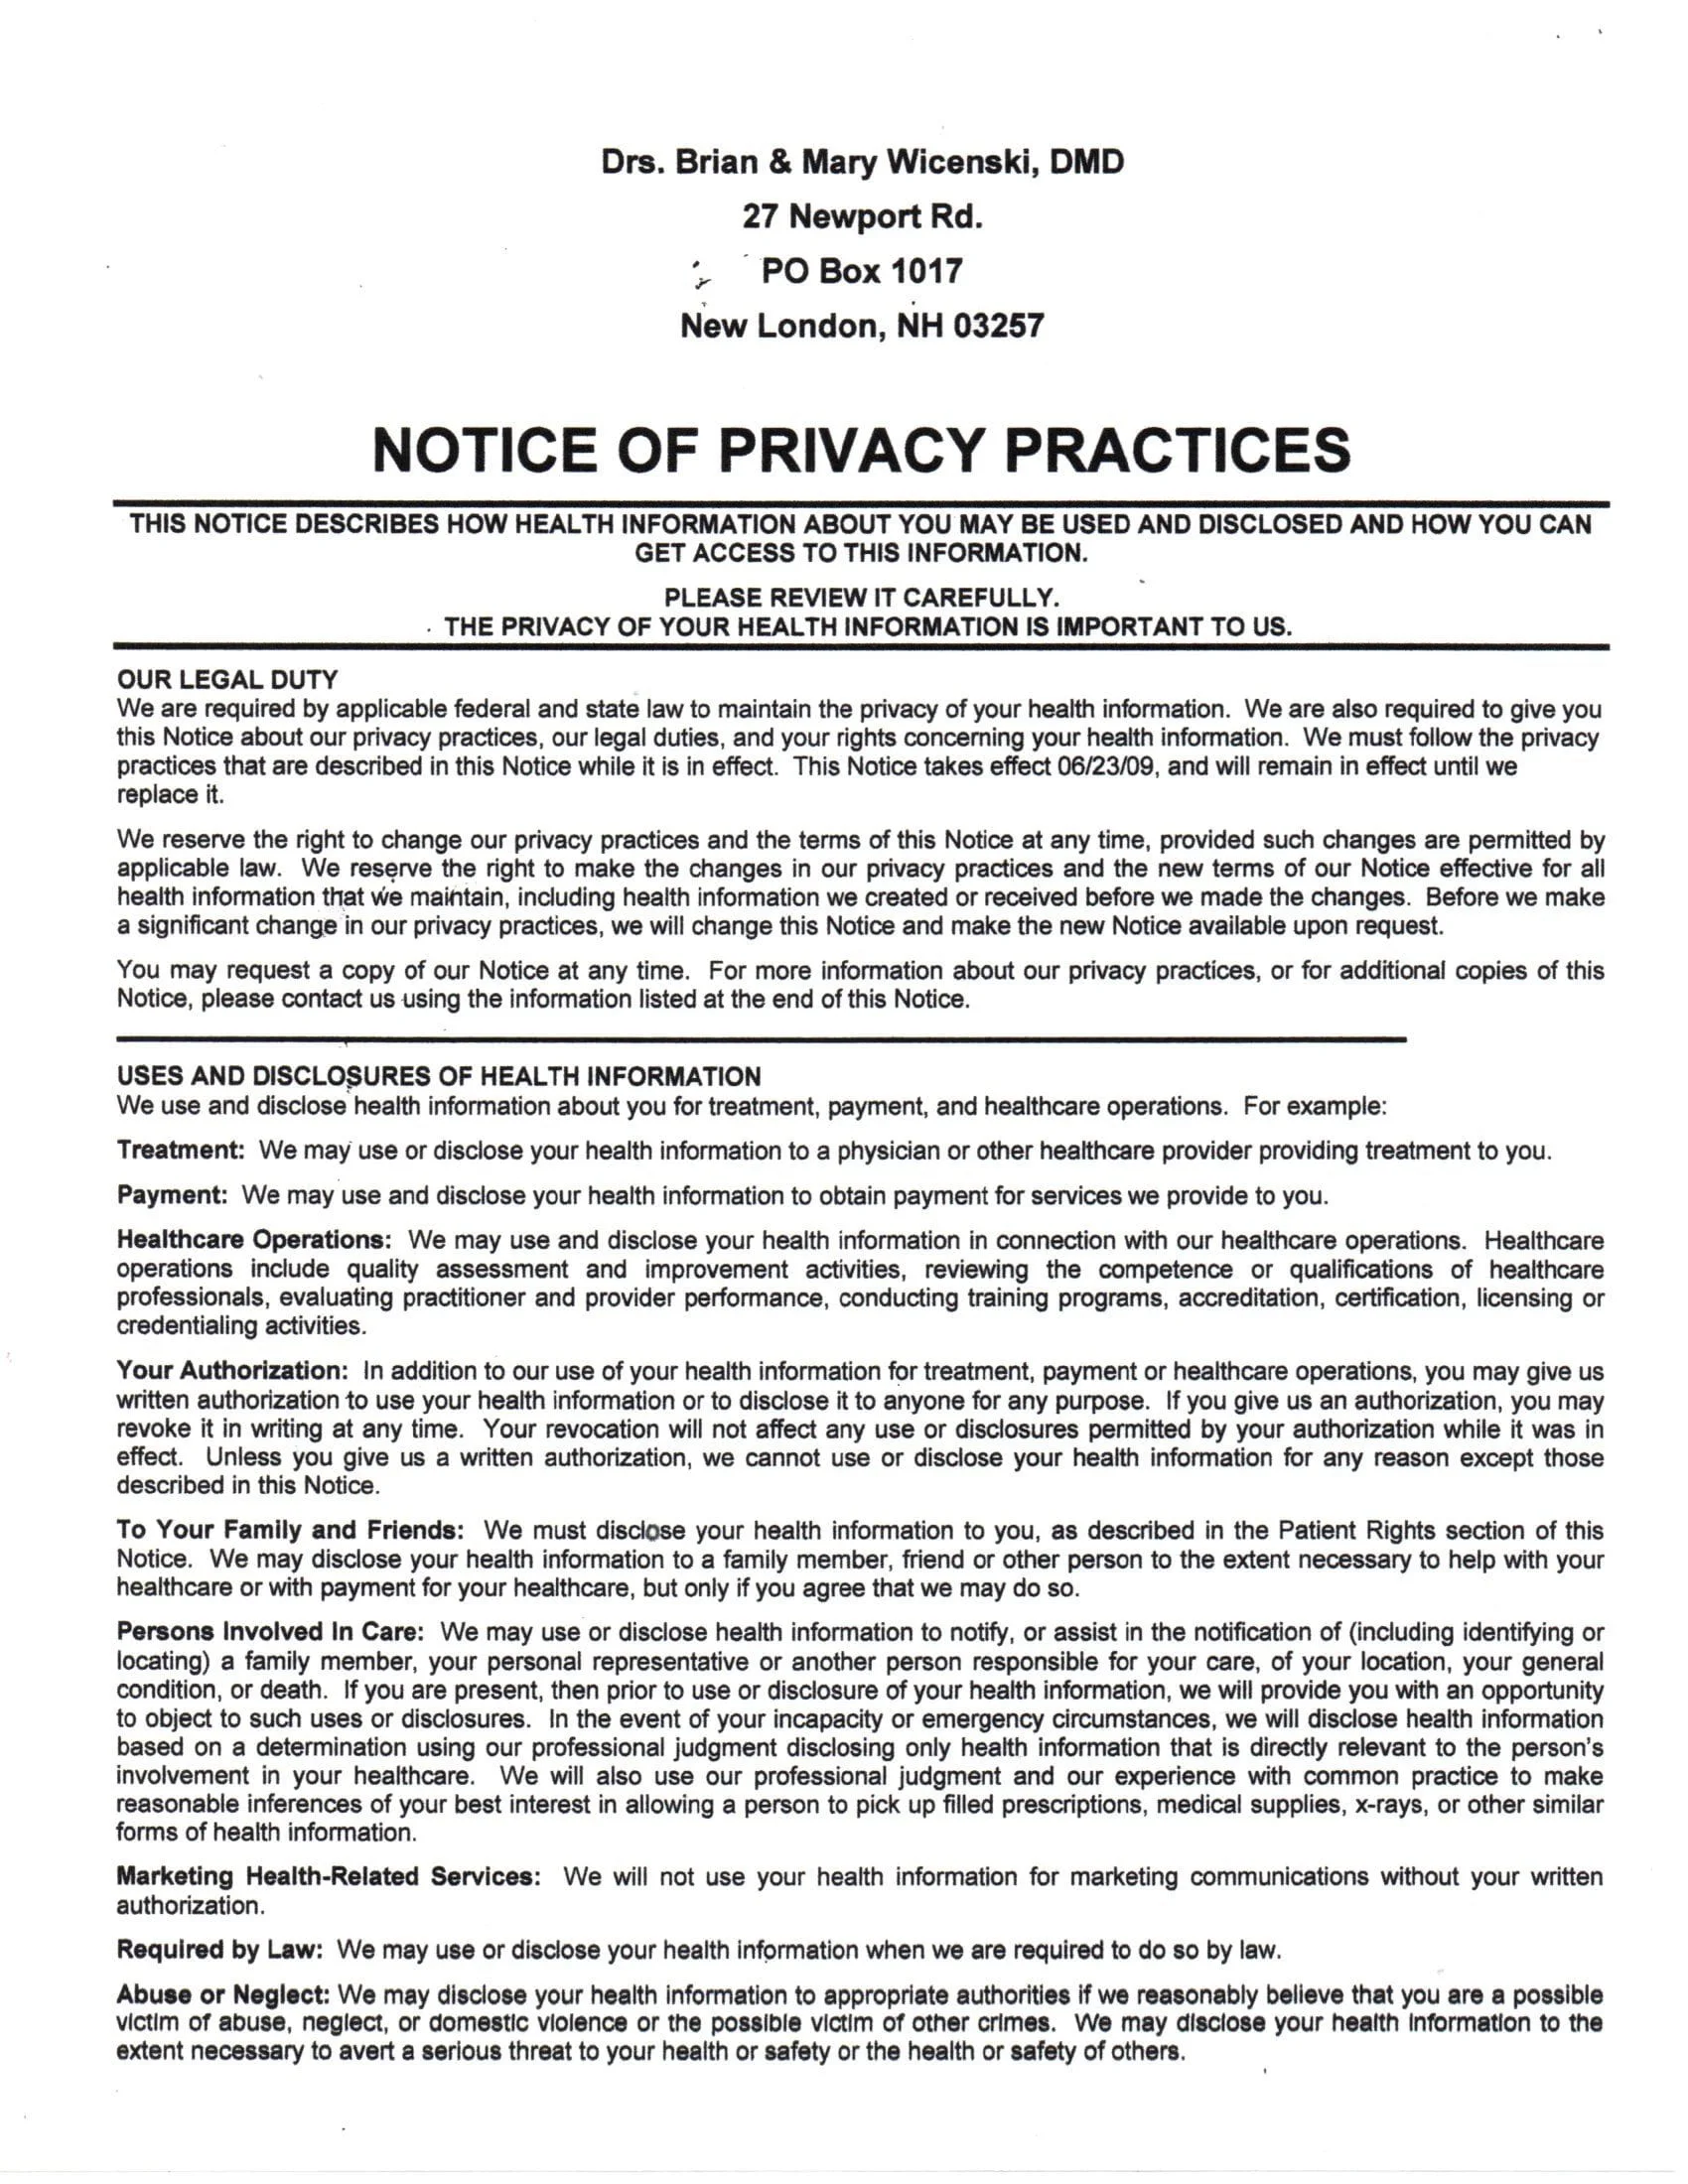 Privacypracticespage1